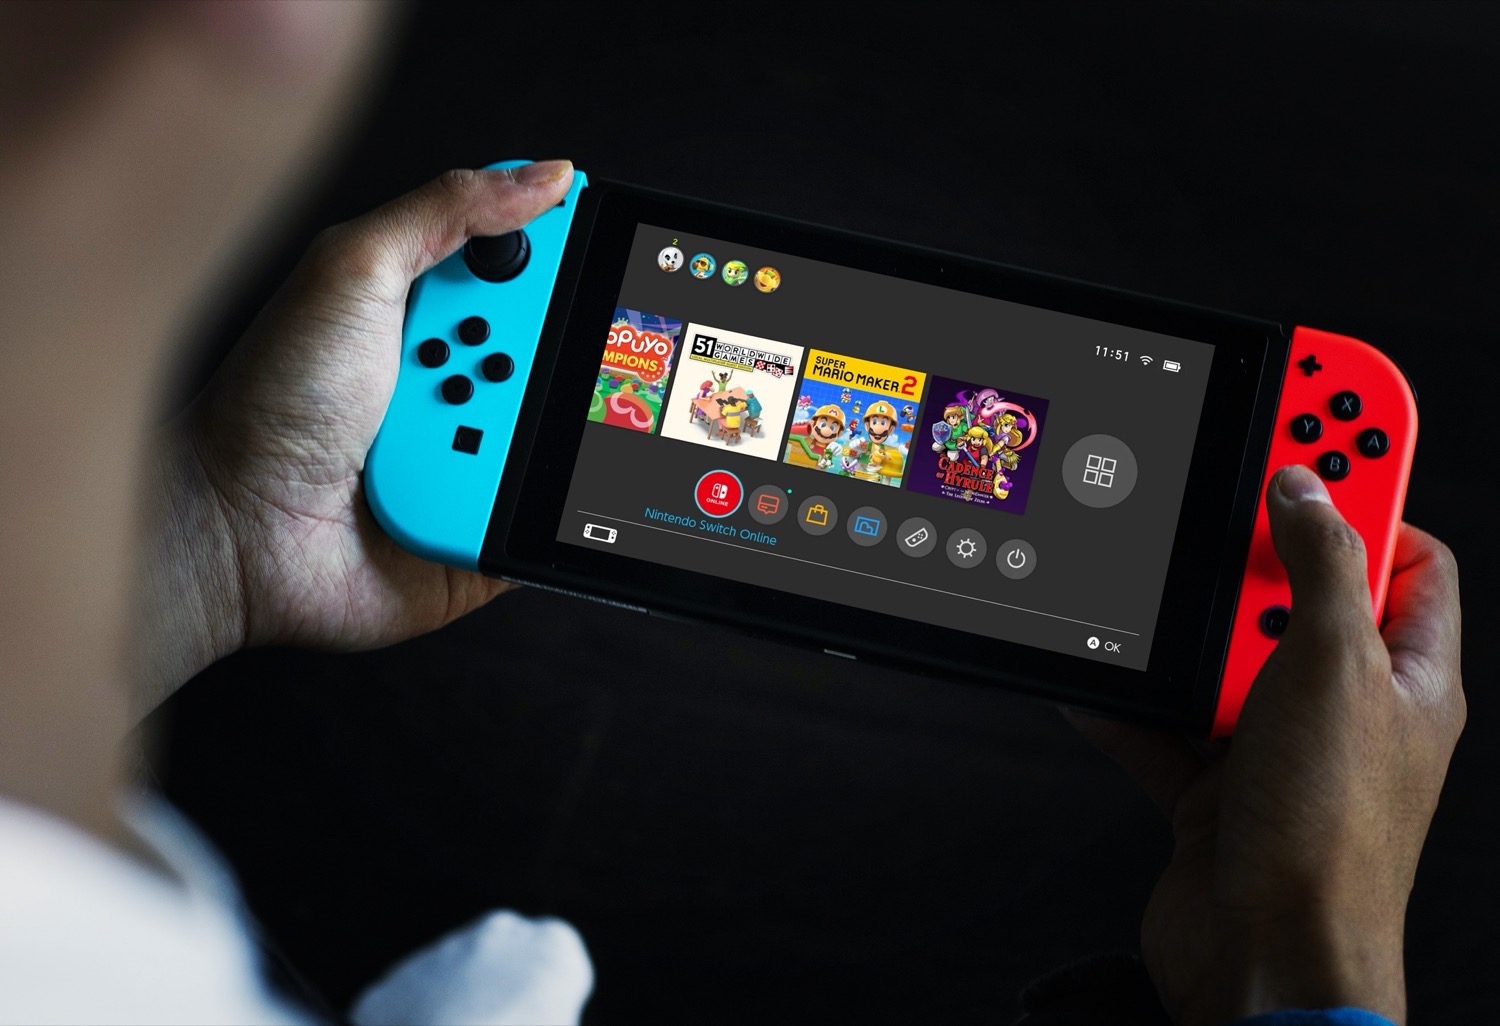 The Nintendo Switch receives new features with V11.0.0 OS update